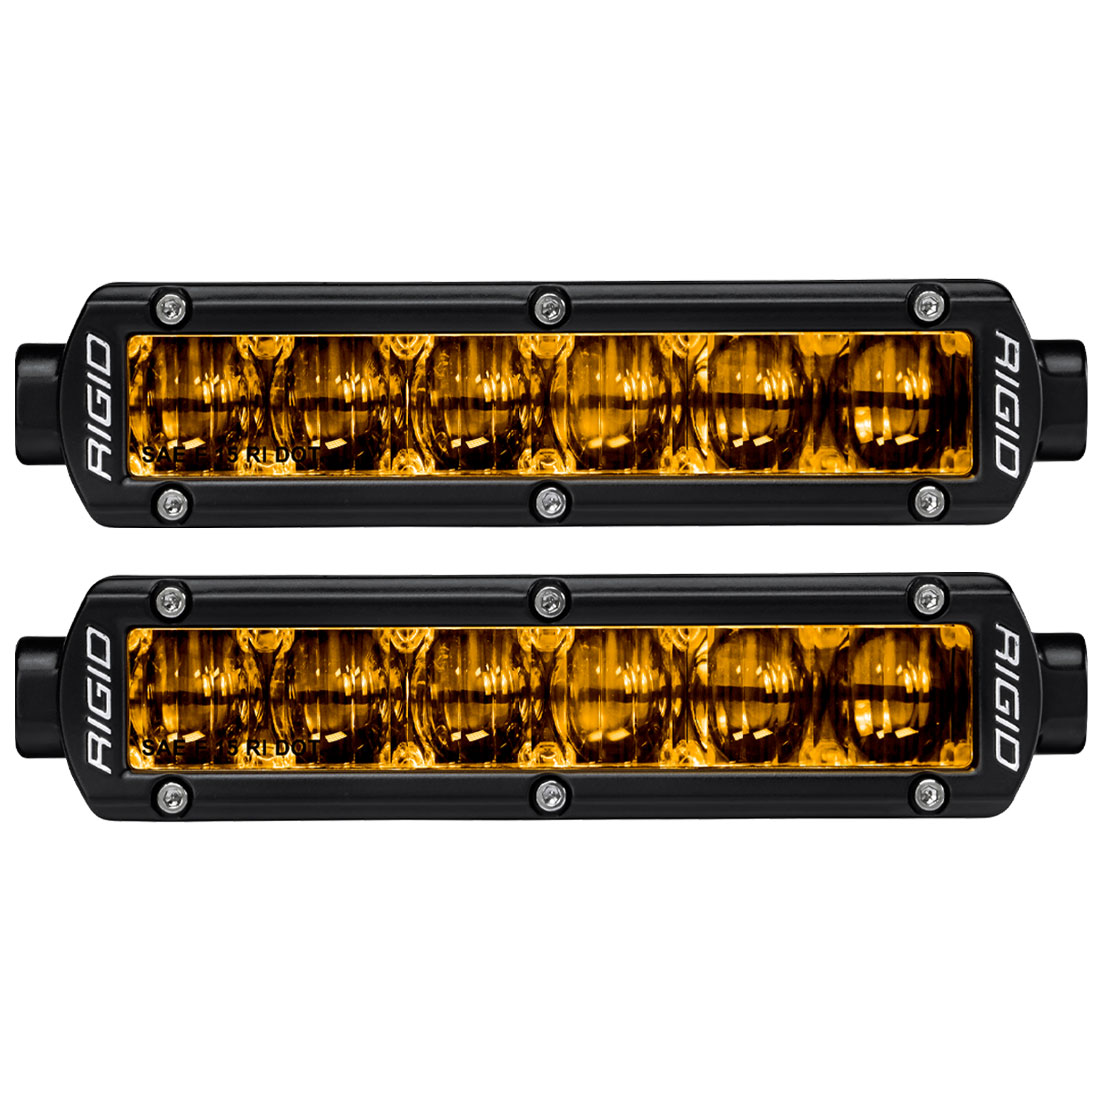 Rigid Industries SAE J583 Compliant Selective Yellow Fog Light Pair Sr-Series Pro 6 Inch Street Legal Surface Mount - Click Image to Close